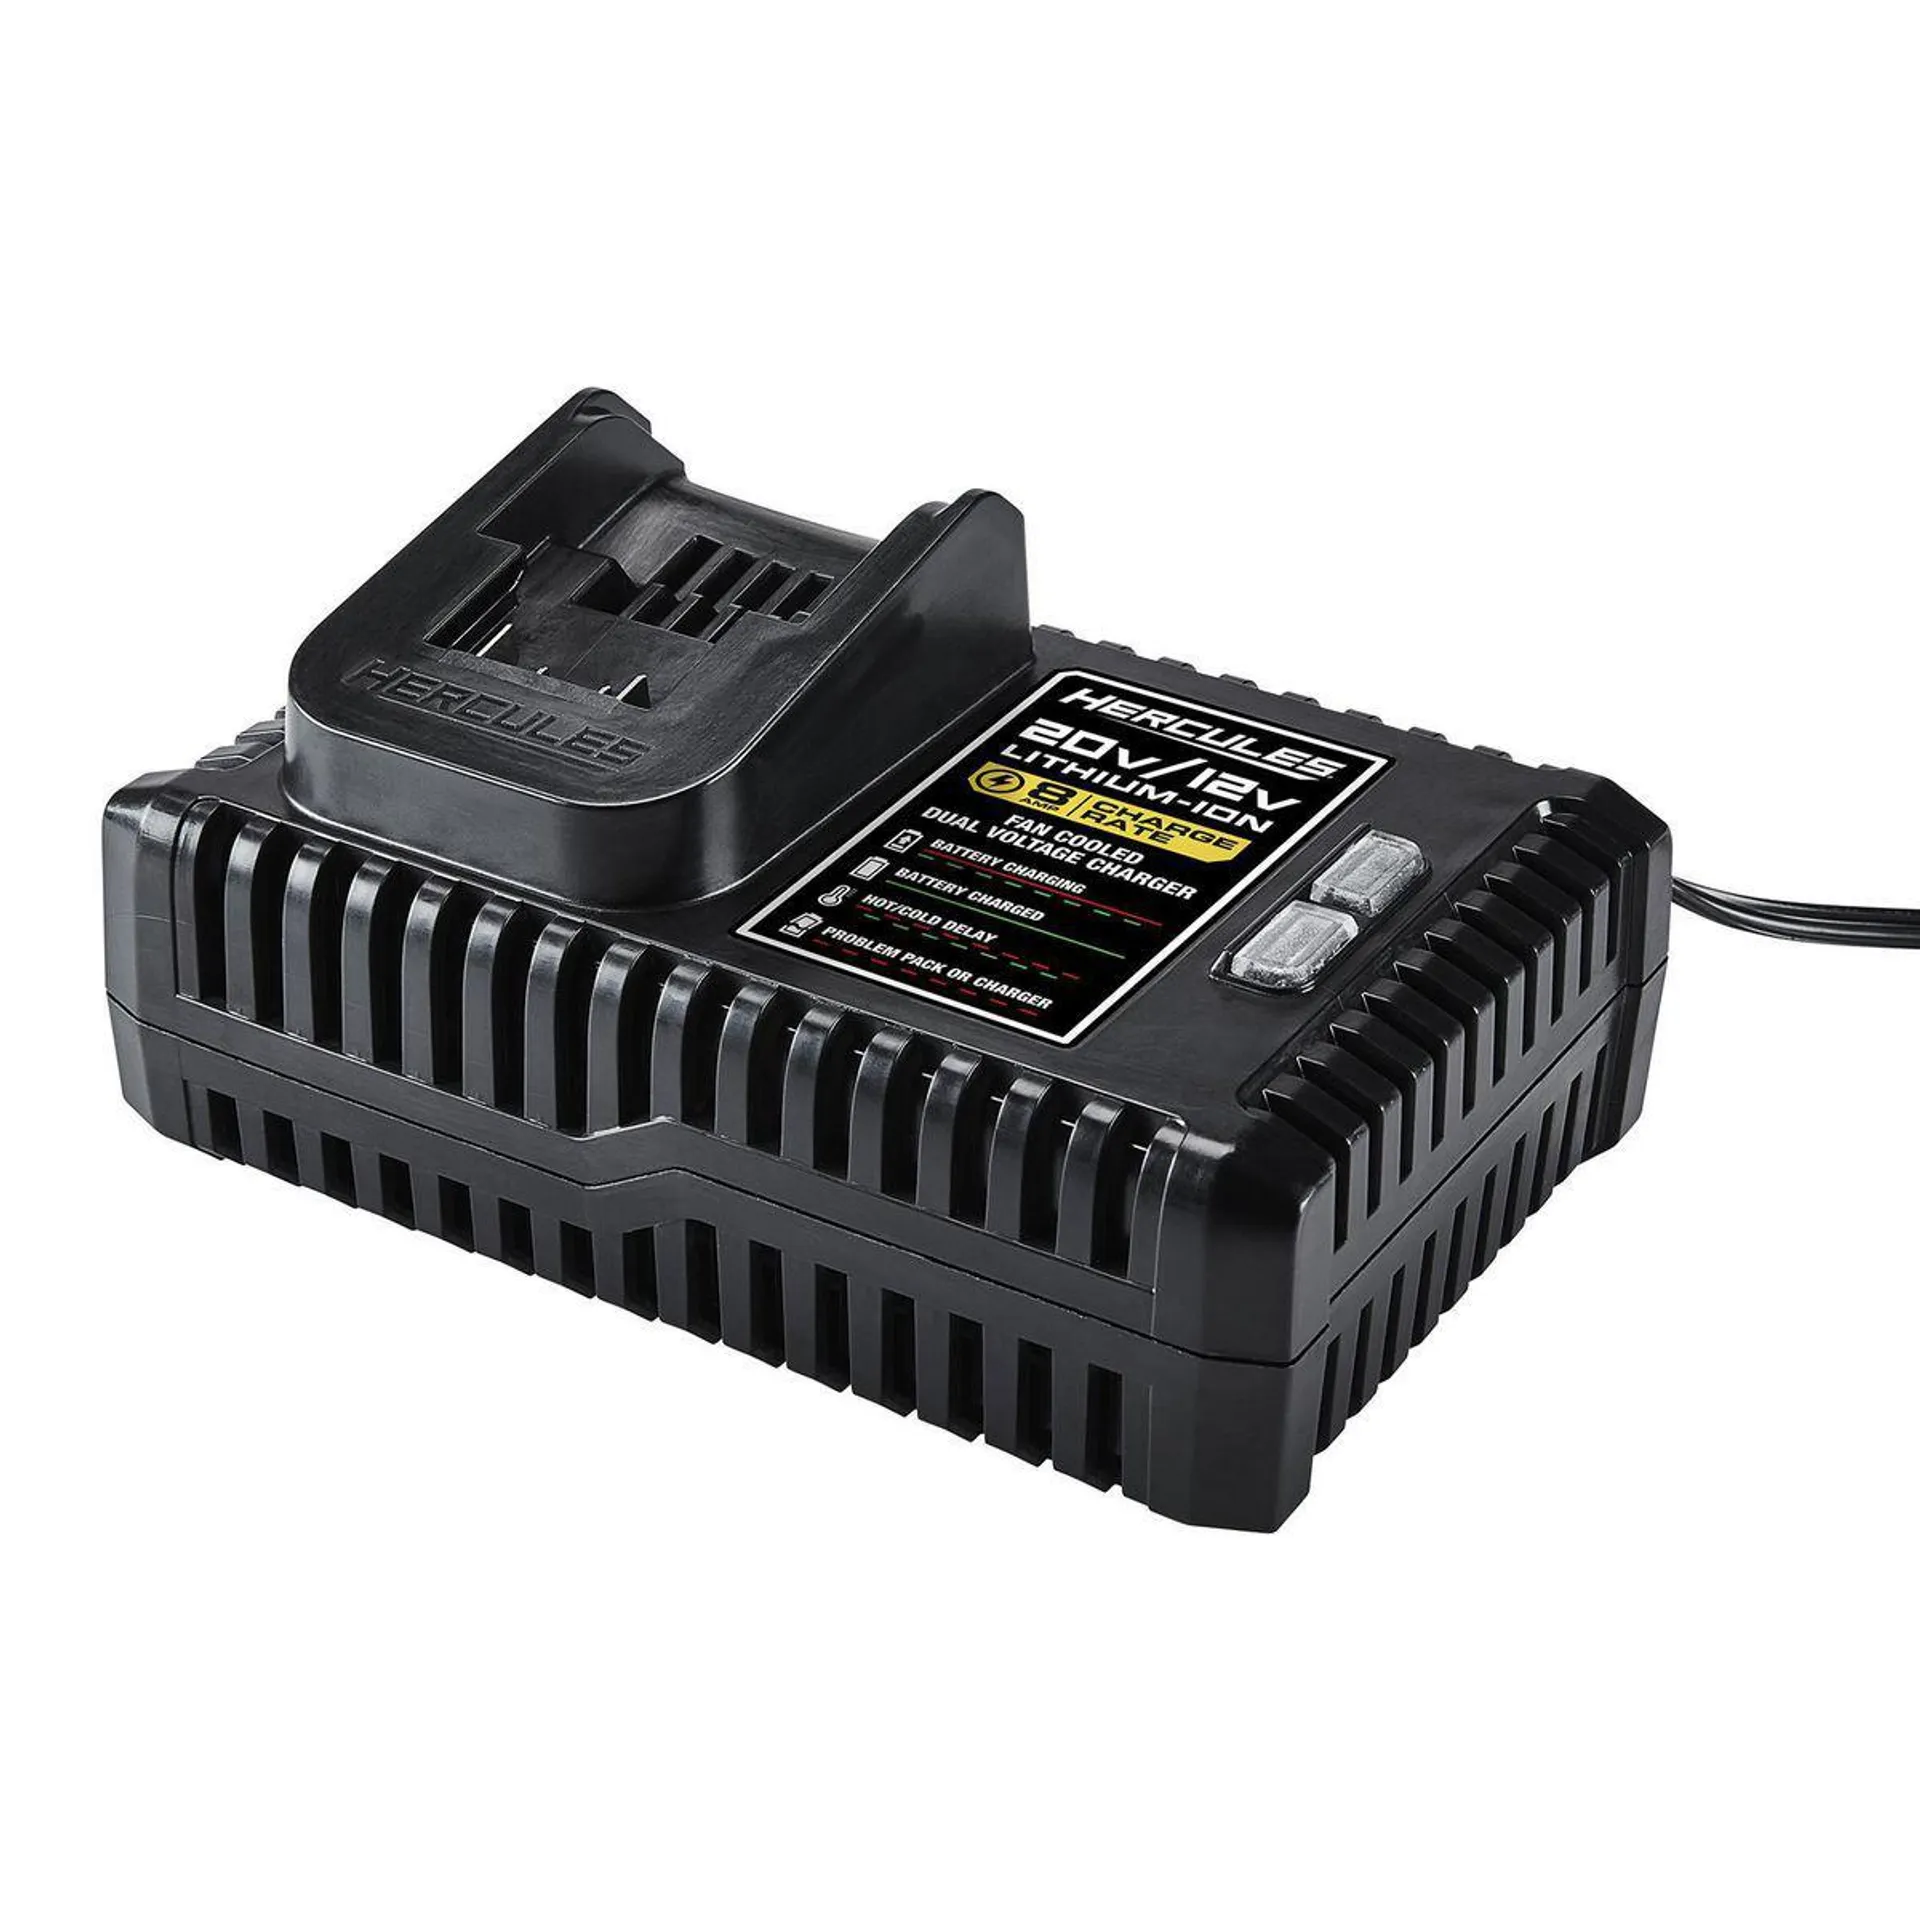 20V/12V Dual Voltage, Fan Cooled Lithium-Ion Battery Charger